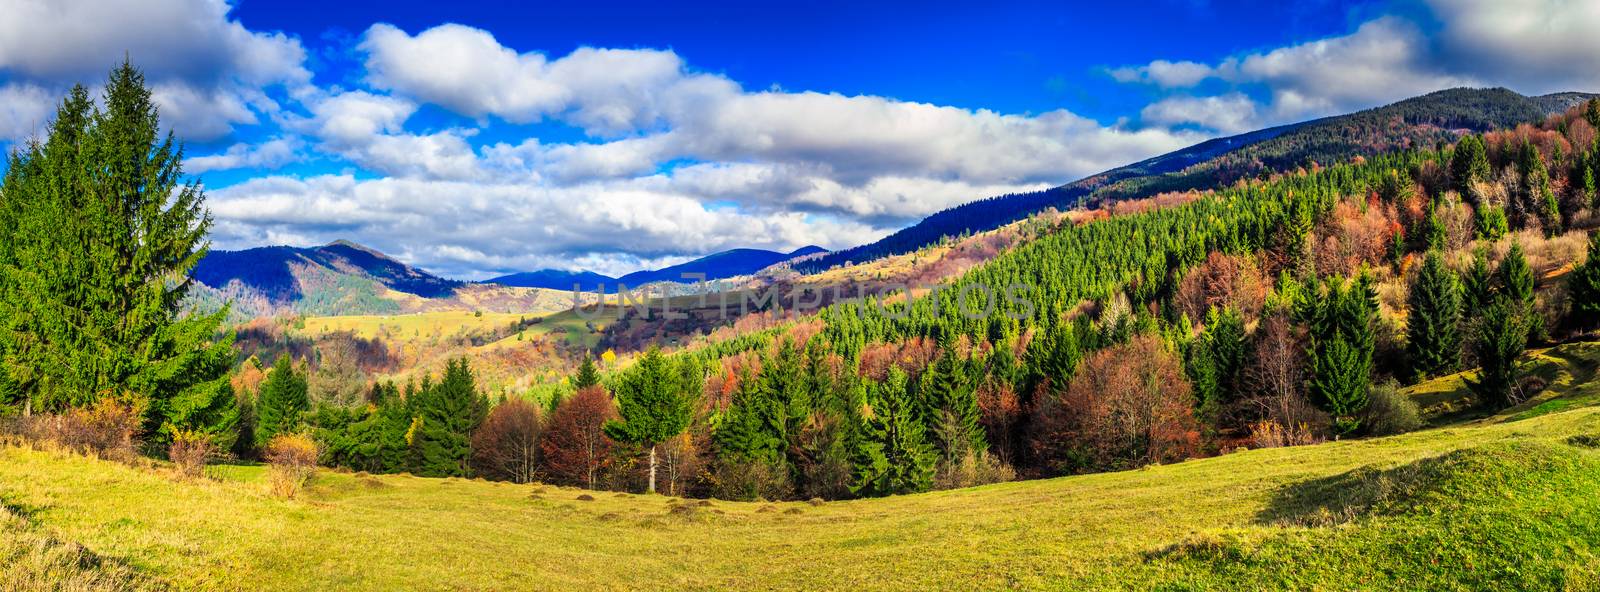 panoramic image  of autumn forest with conifer trees on mountain hillside